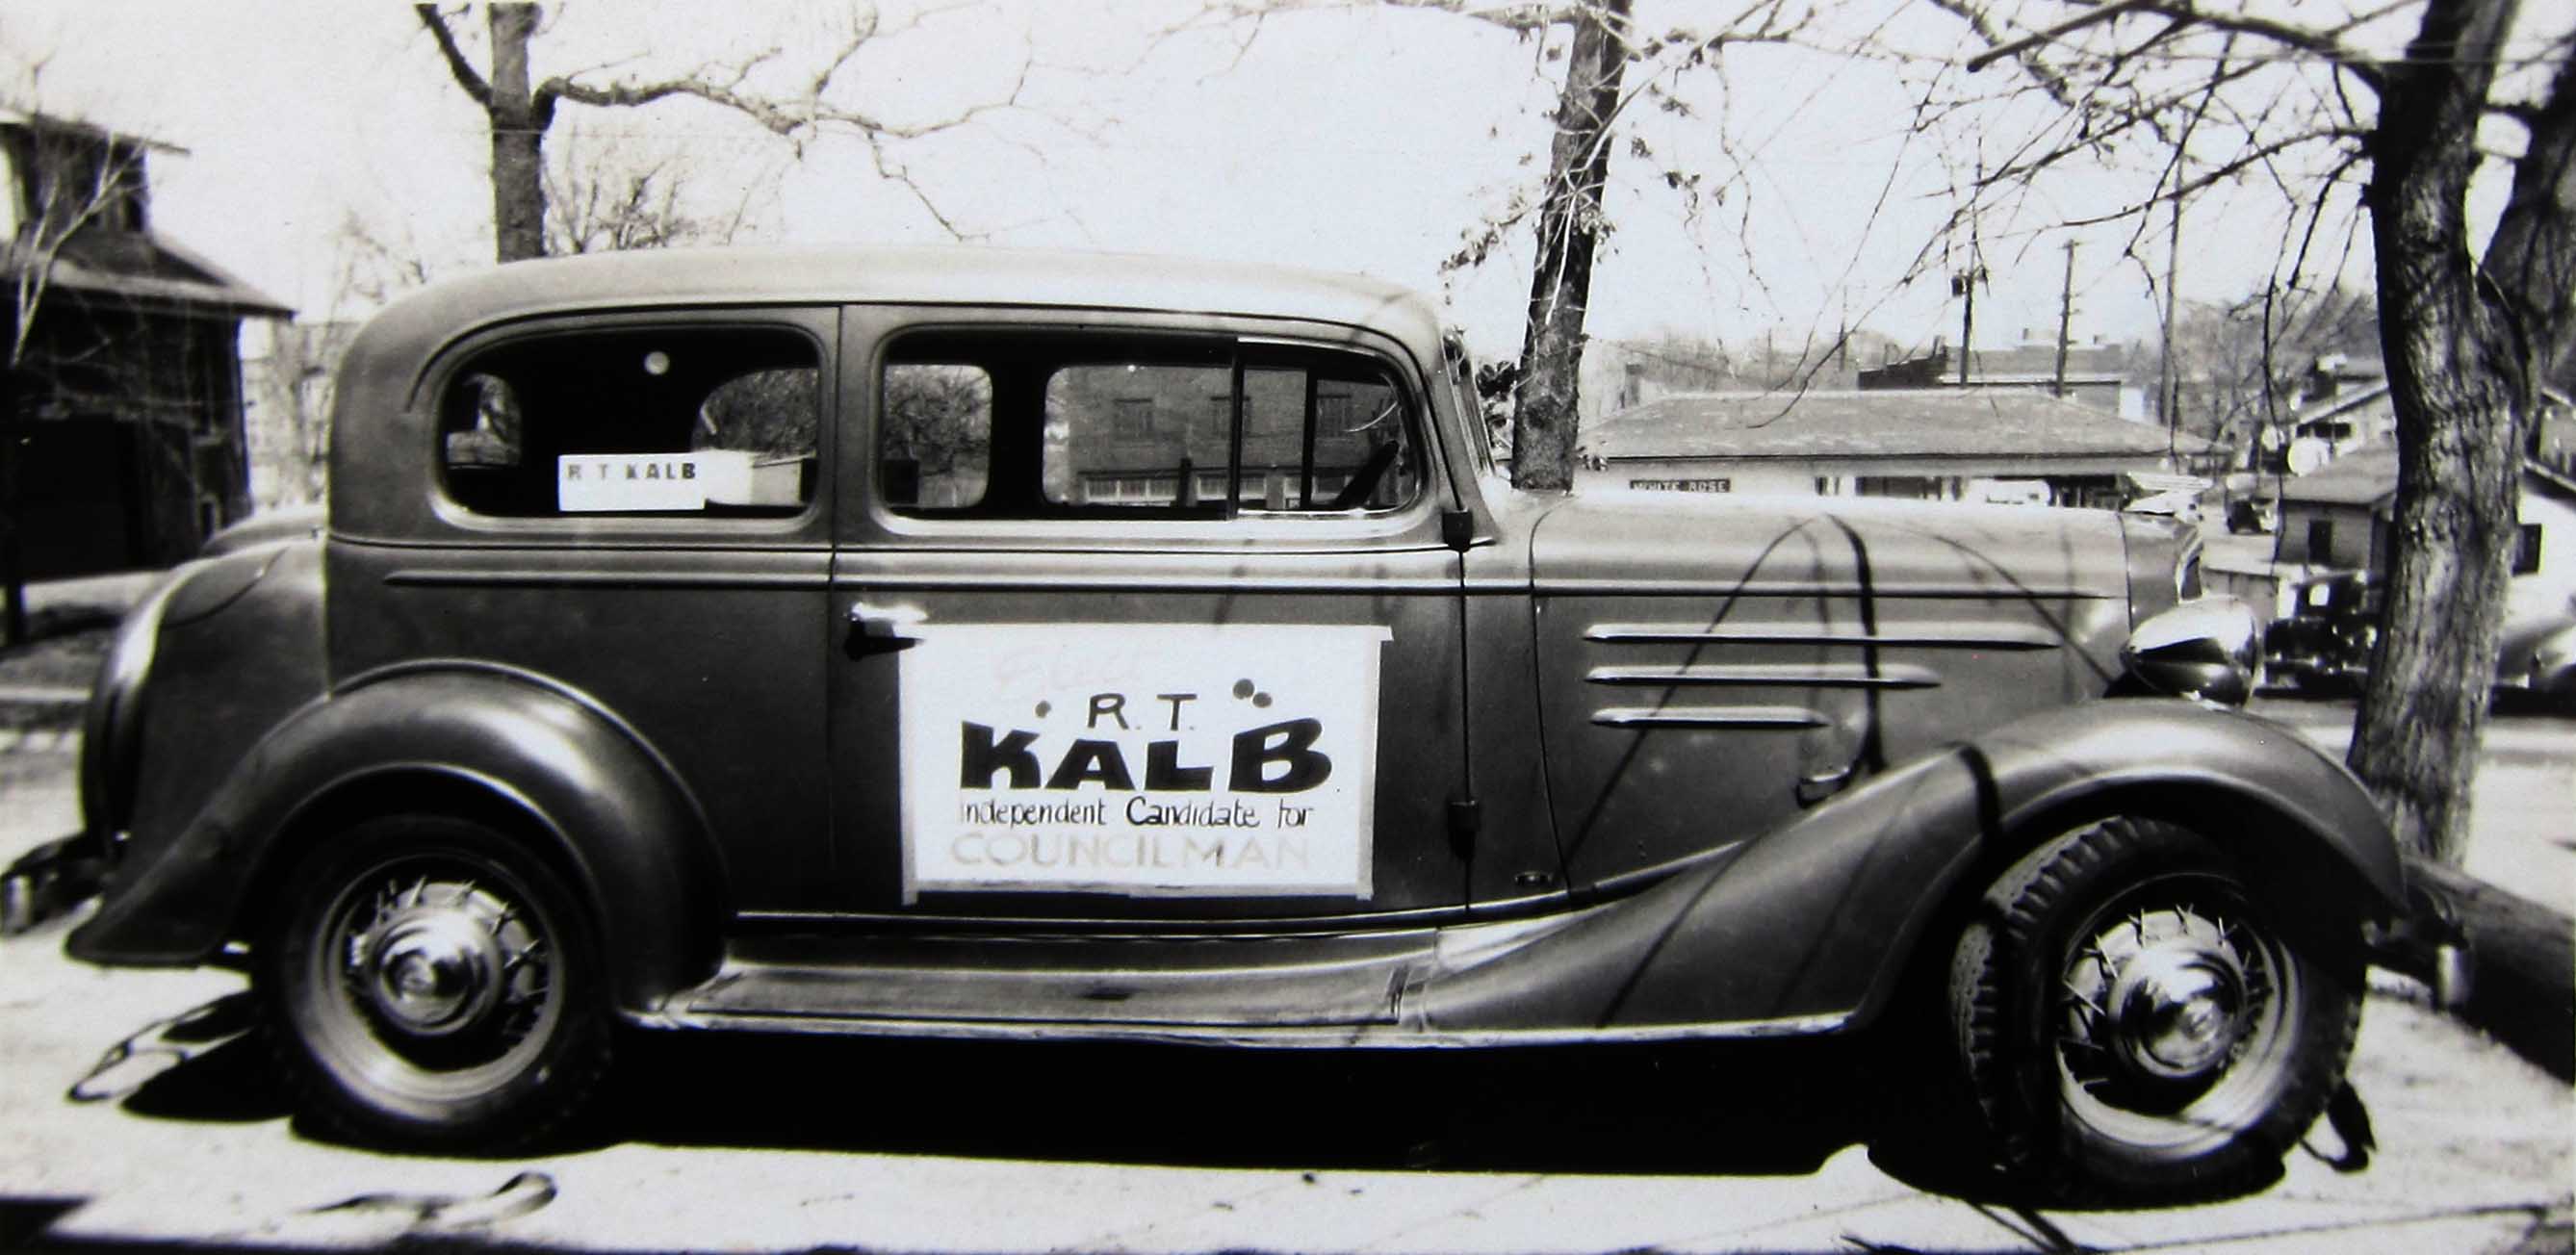 Maplewood History: The Last Words on R.T.Kalb and Kalb Electric